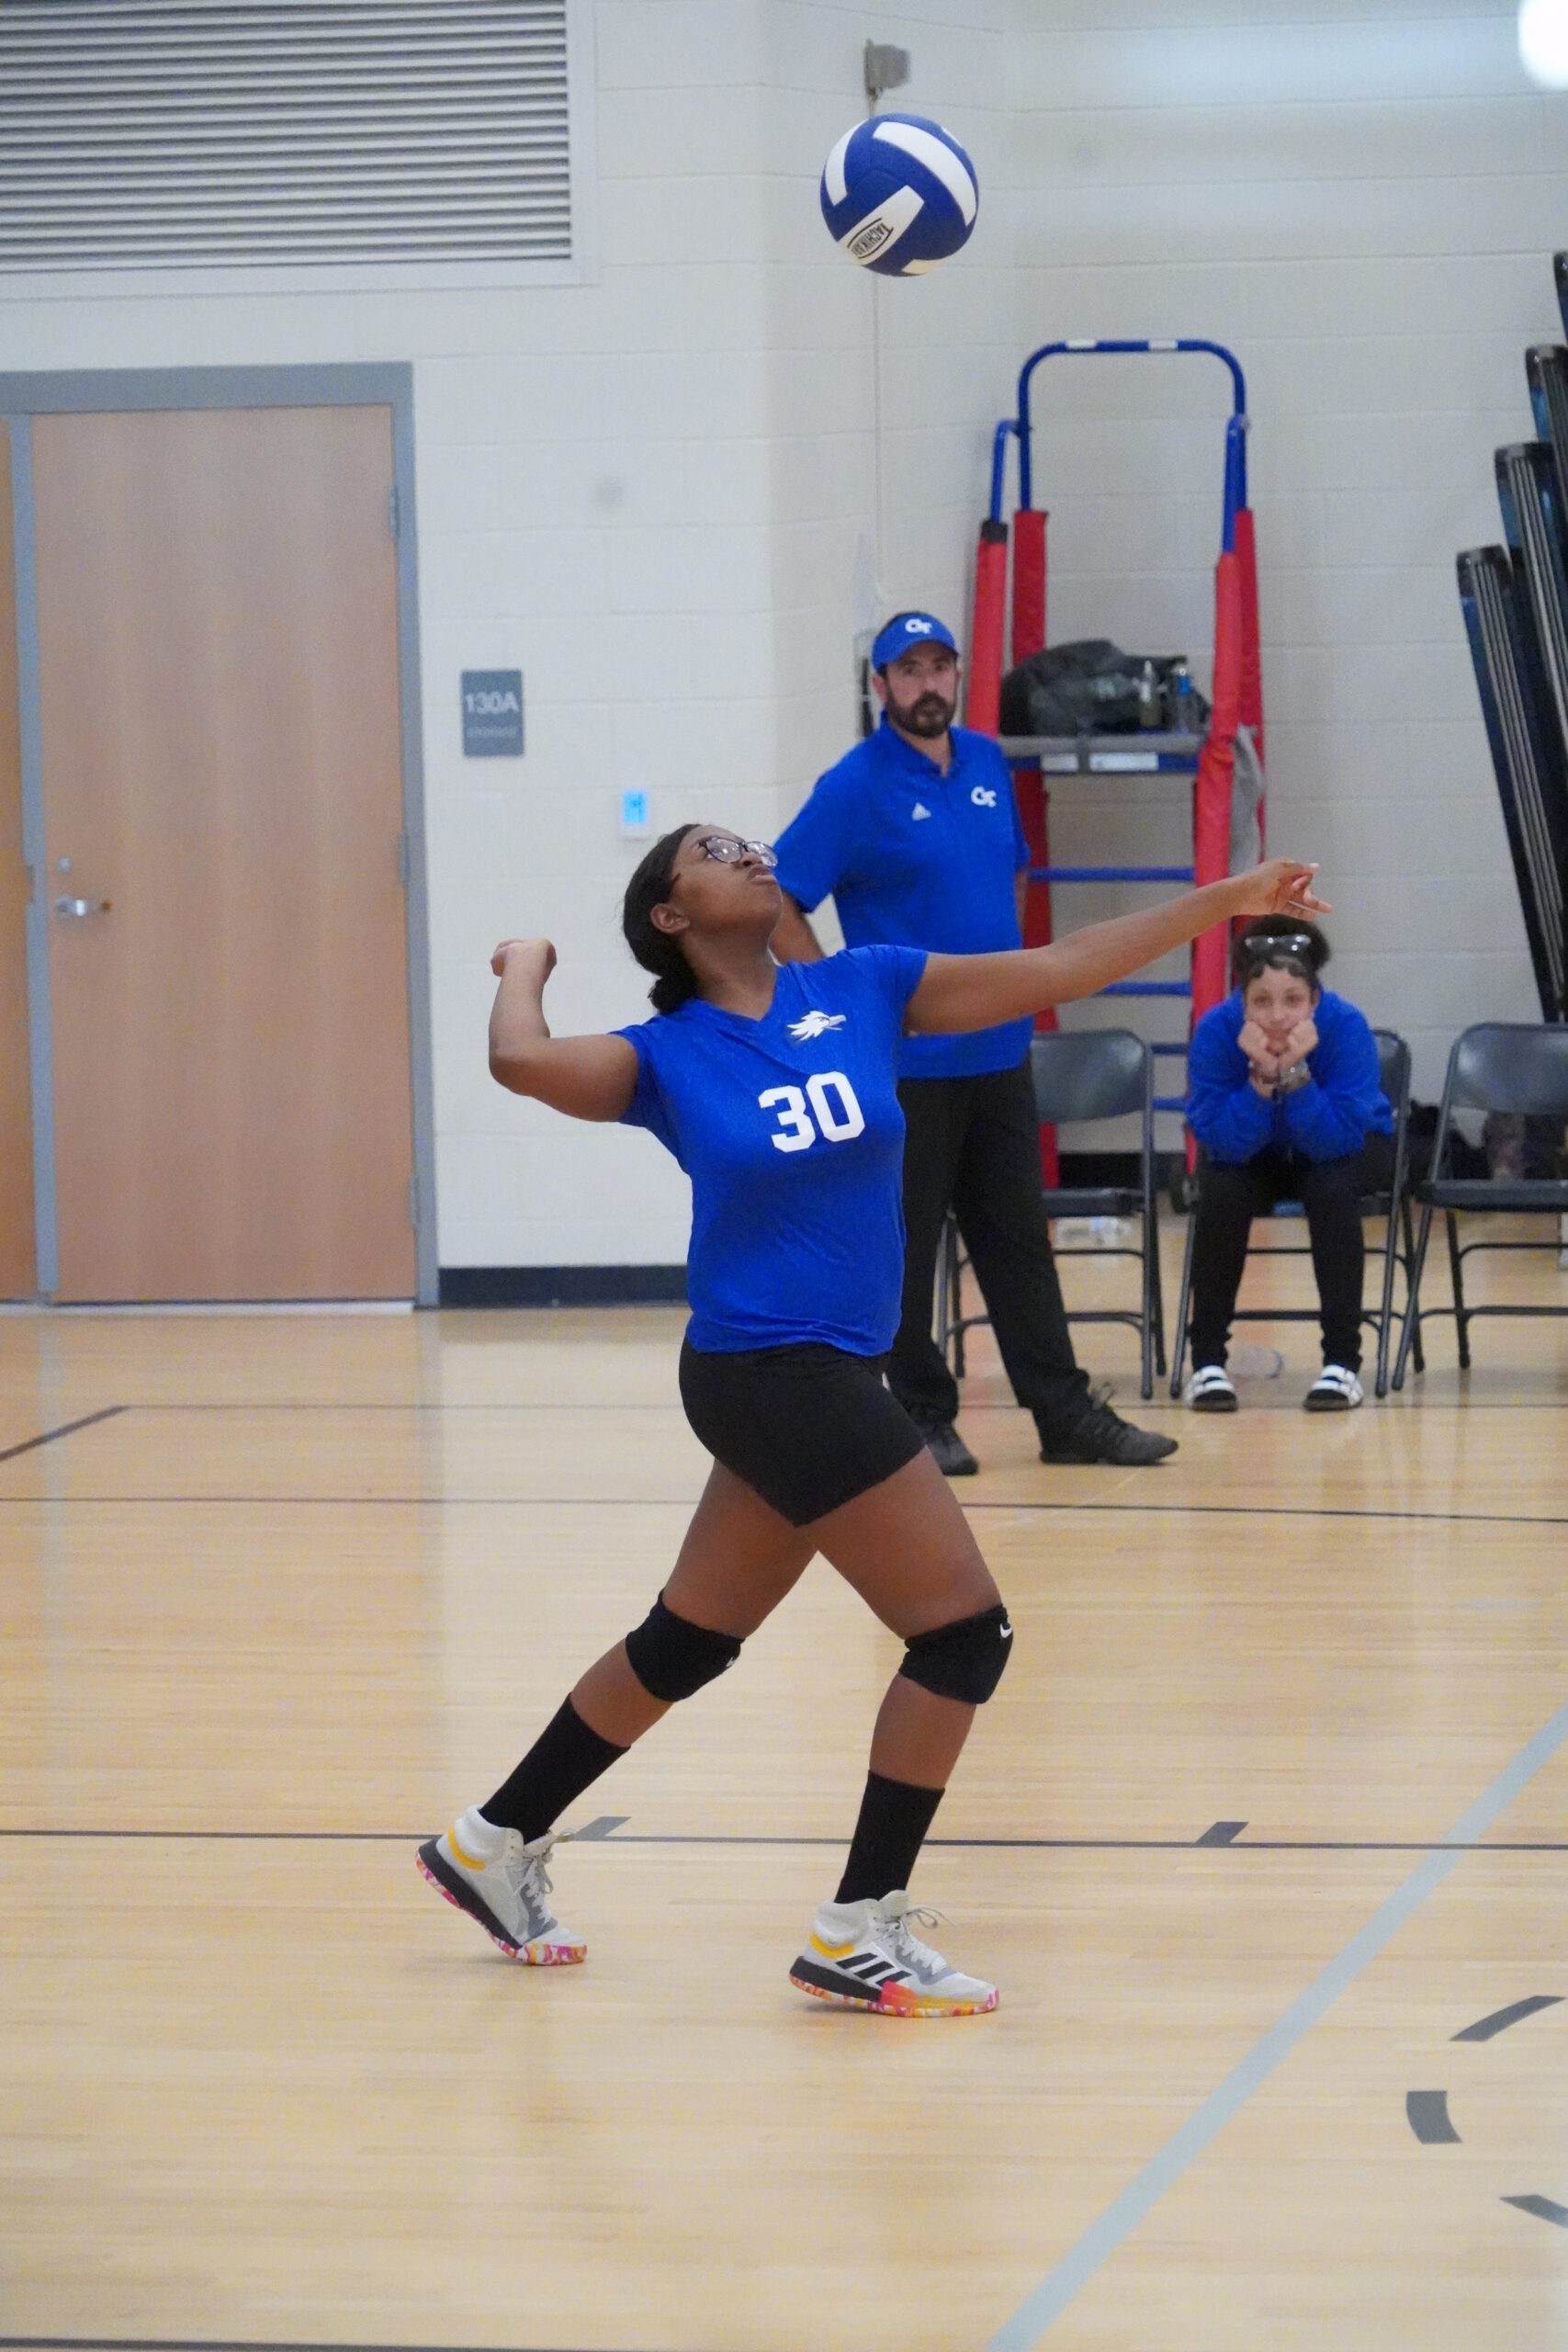 Player serving up the ball at a Grasso Tech Volleyball Game